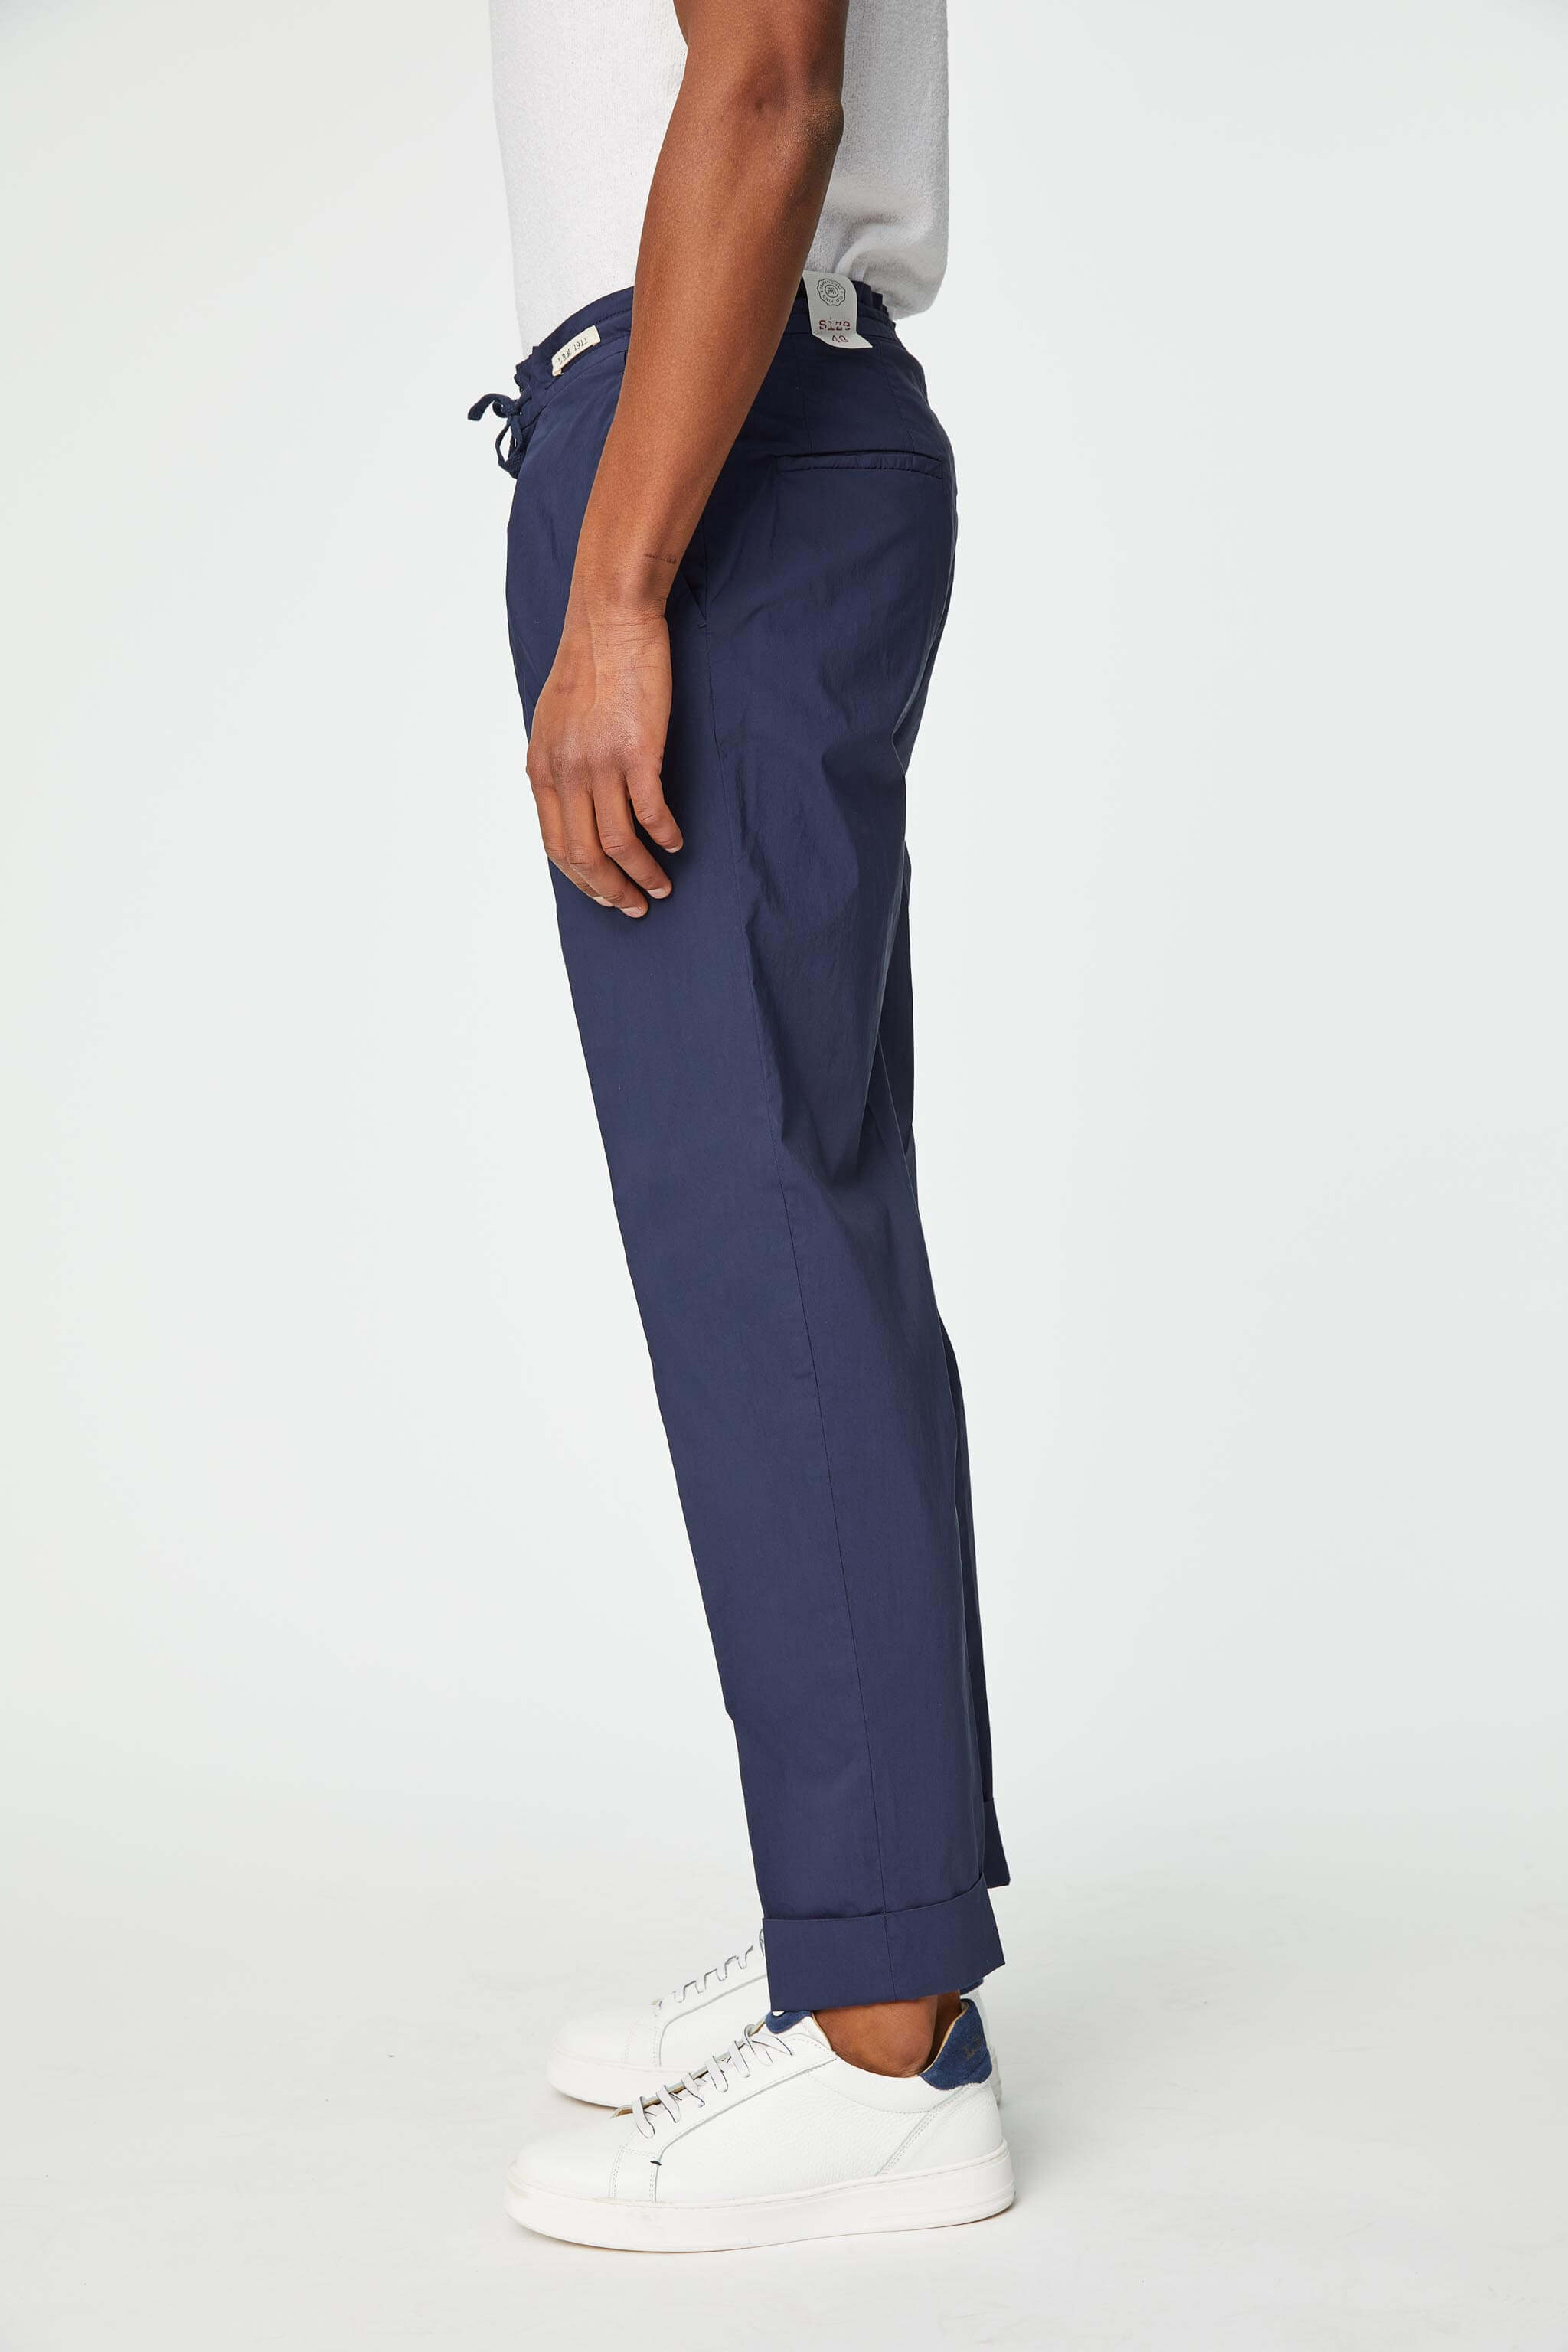 Garment-dyed LESTER pants in blue